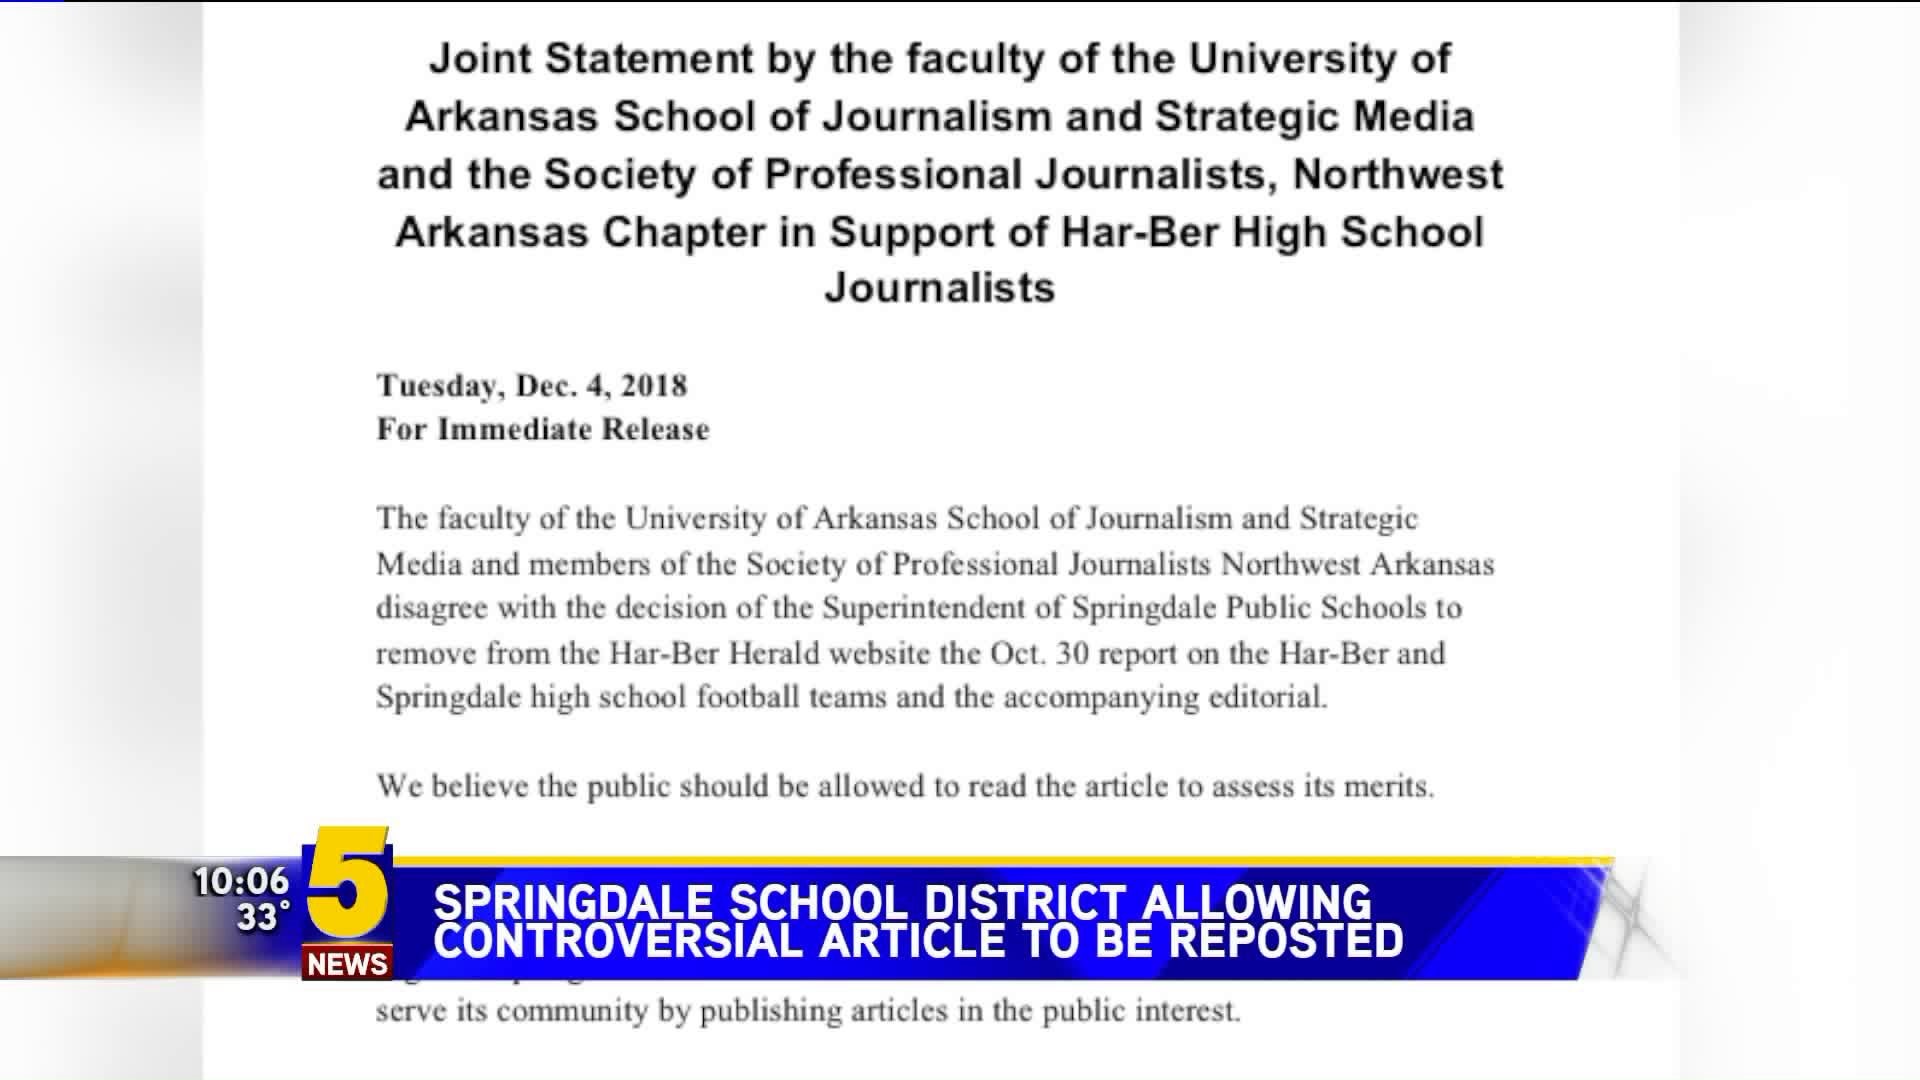 Springdale School District Allowing Controversial Article To Be Reposted